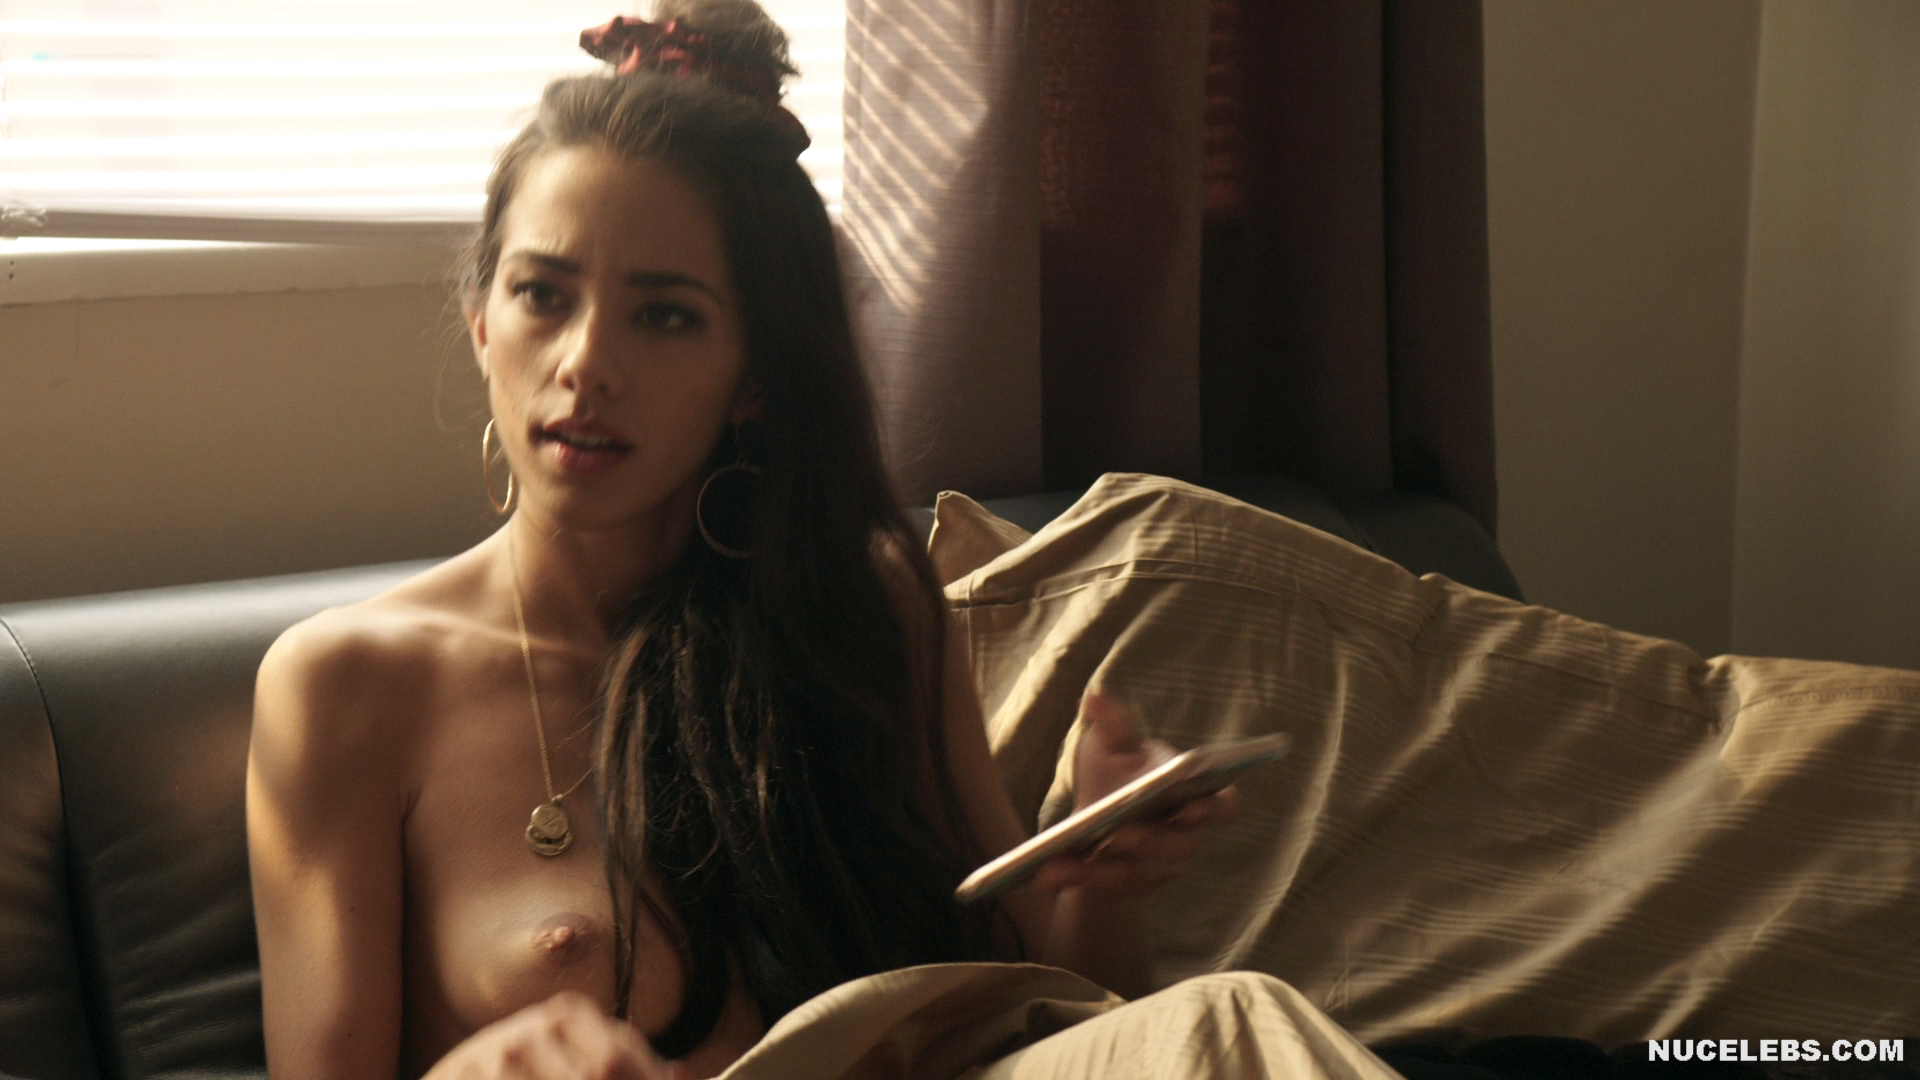 The adorable Seychelle Gabriel played completely nude there in a hot sex sc...